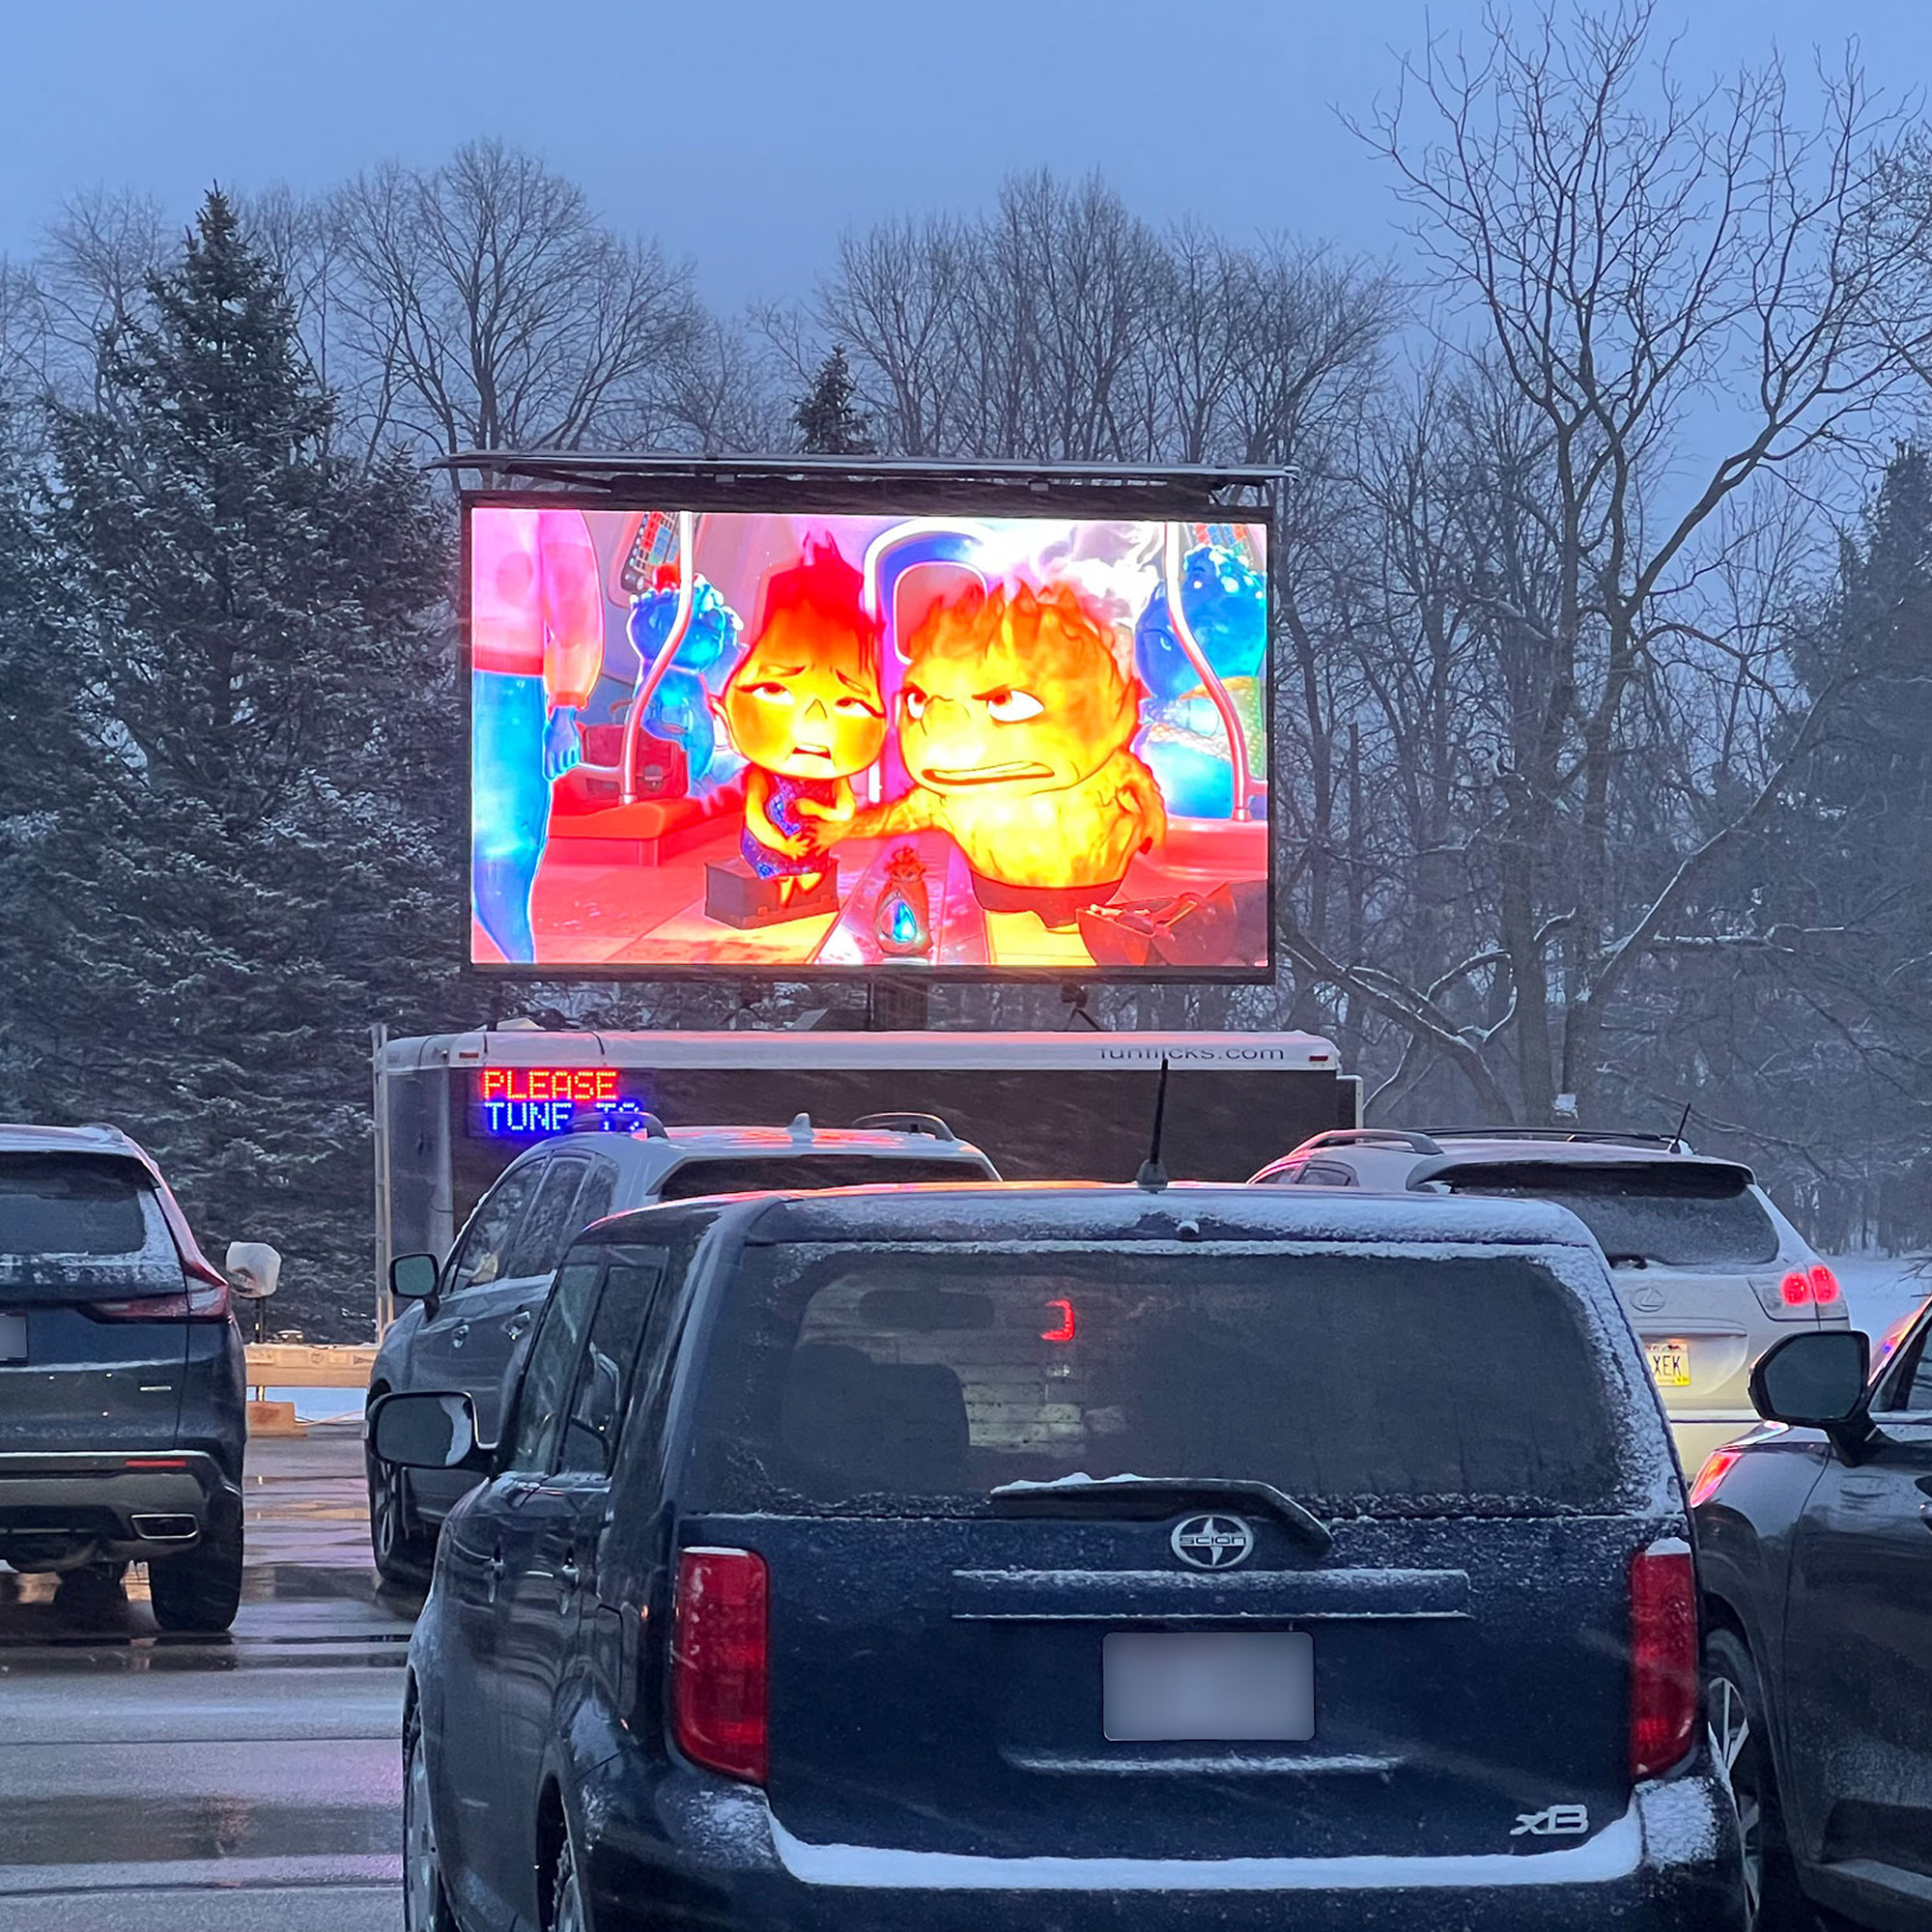 FunFlicks® LED trailer at a snowy drive-in